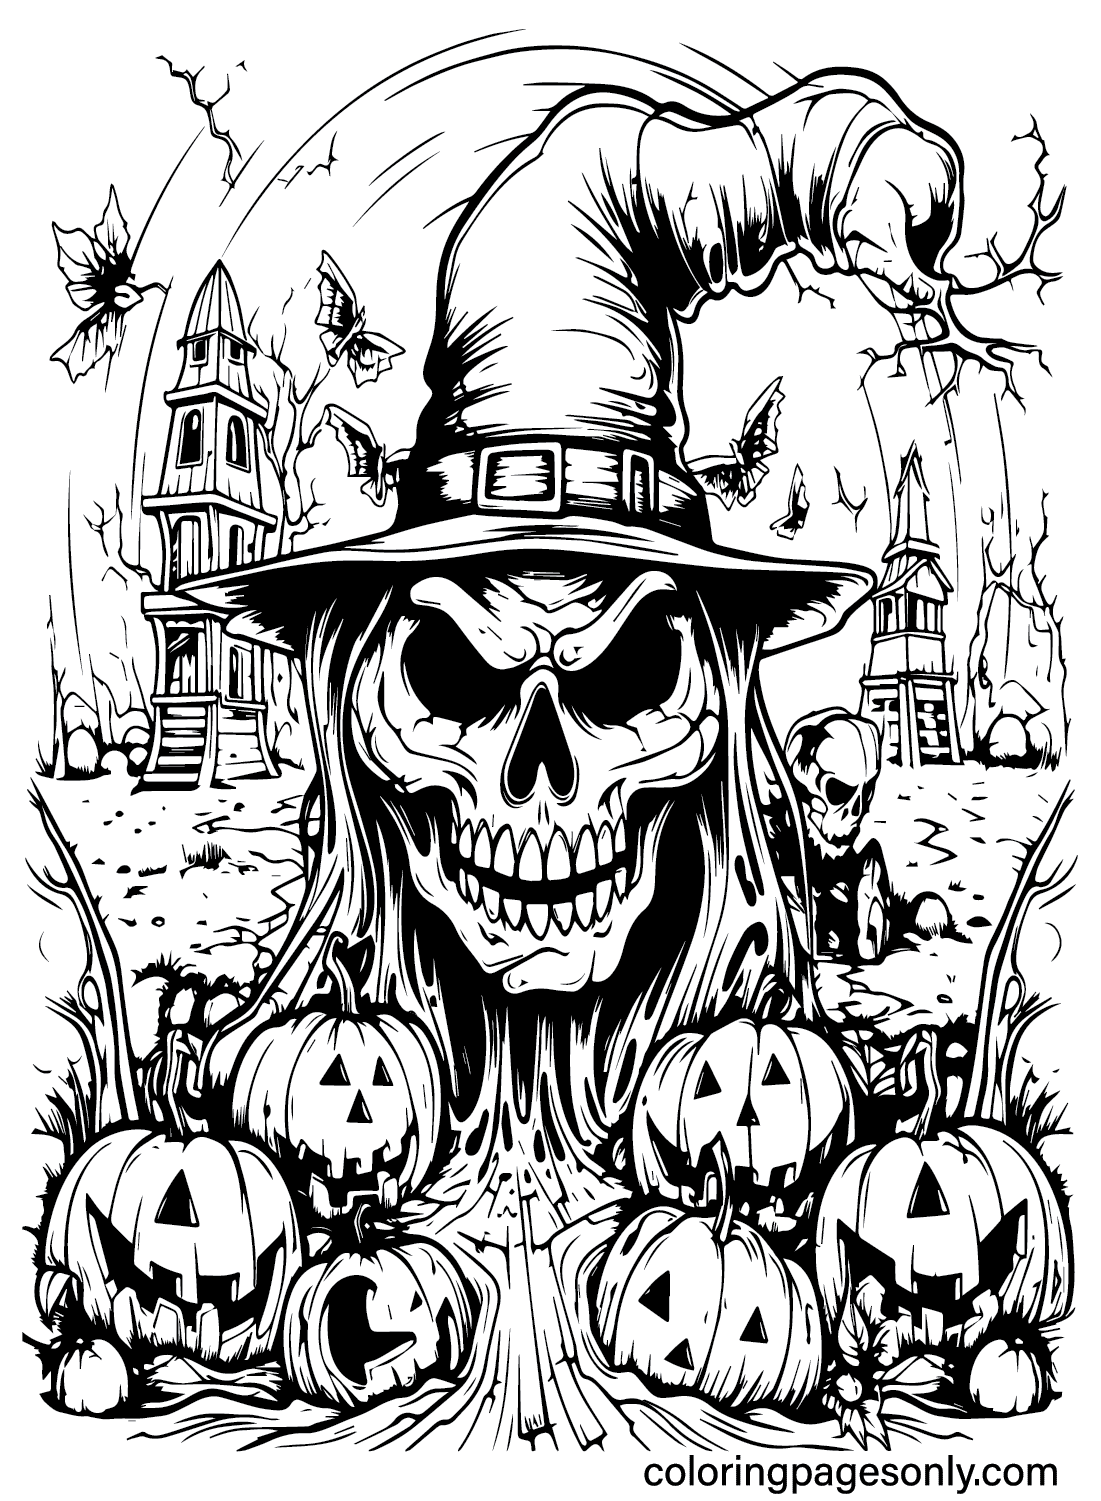 Scary Halloween Images to Color from Scary Halloween